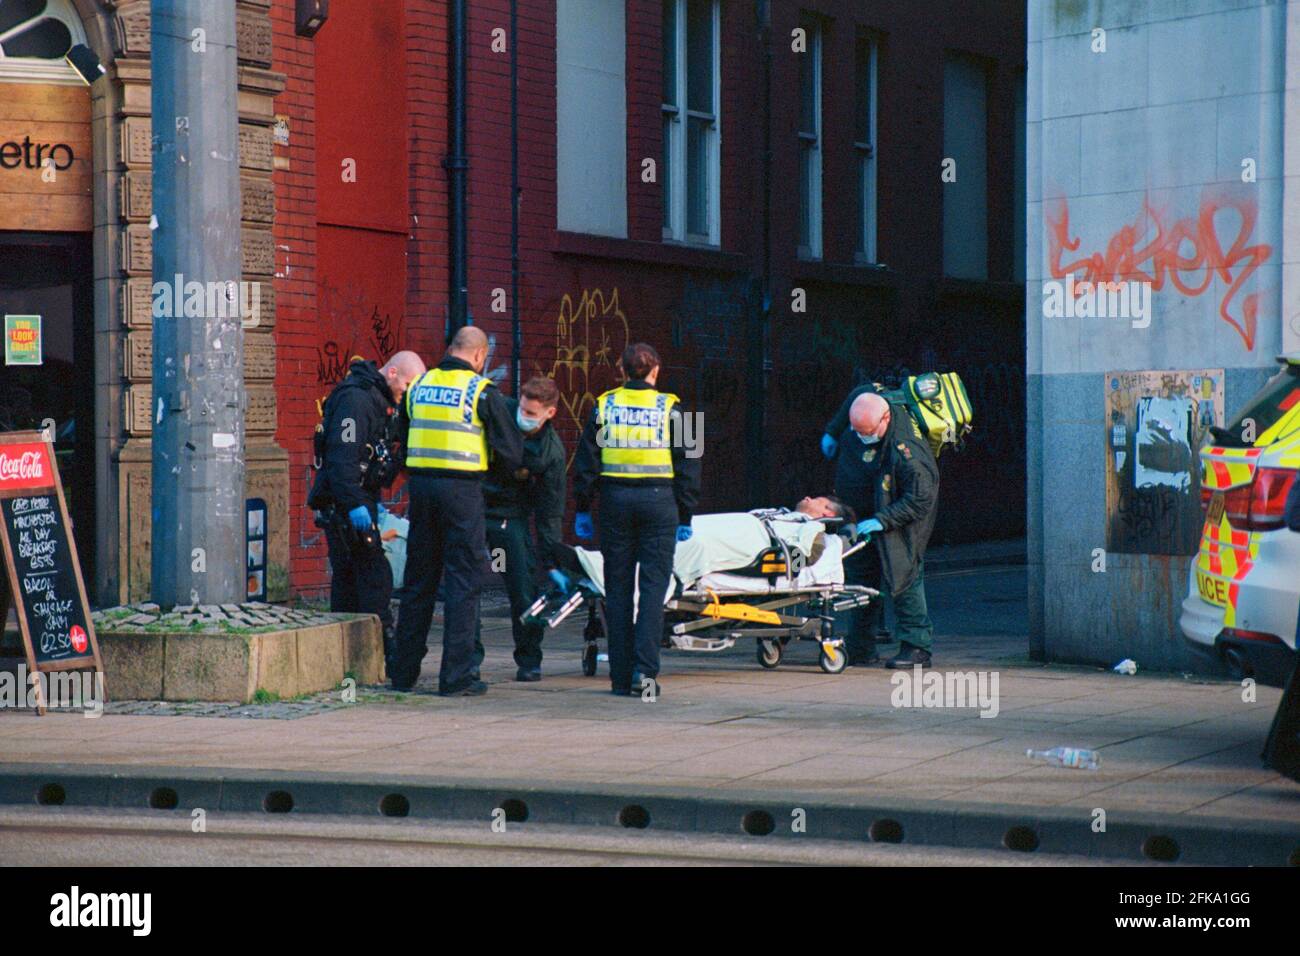 Manchester, UK - 29 December 2020: Emergency service on the High Street. Stock Photo